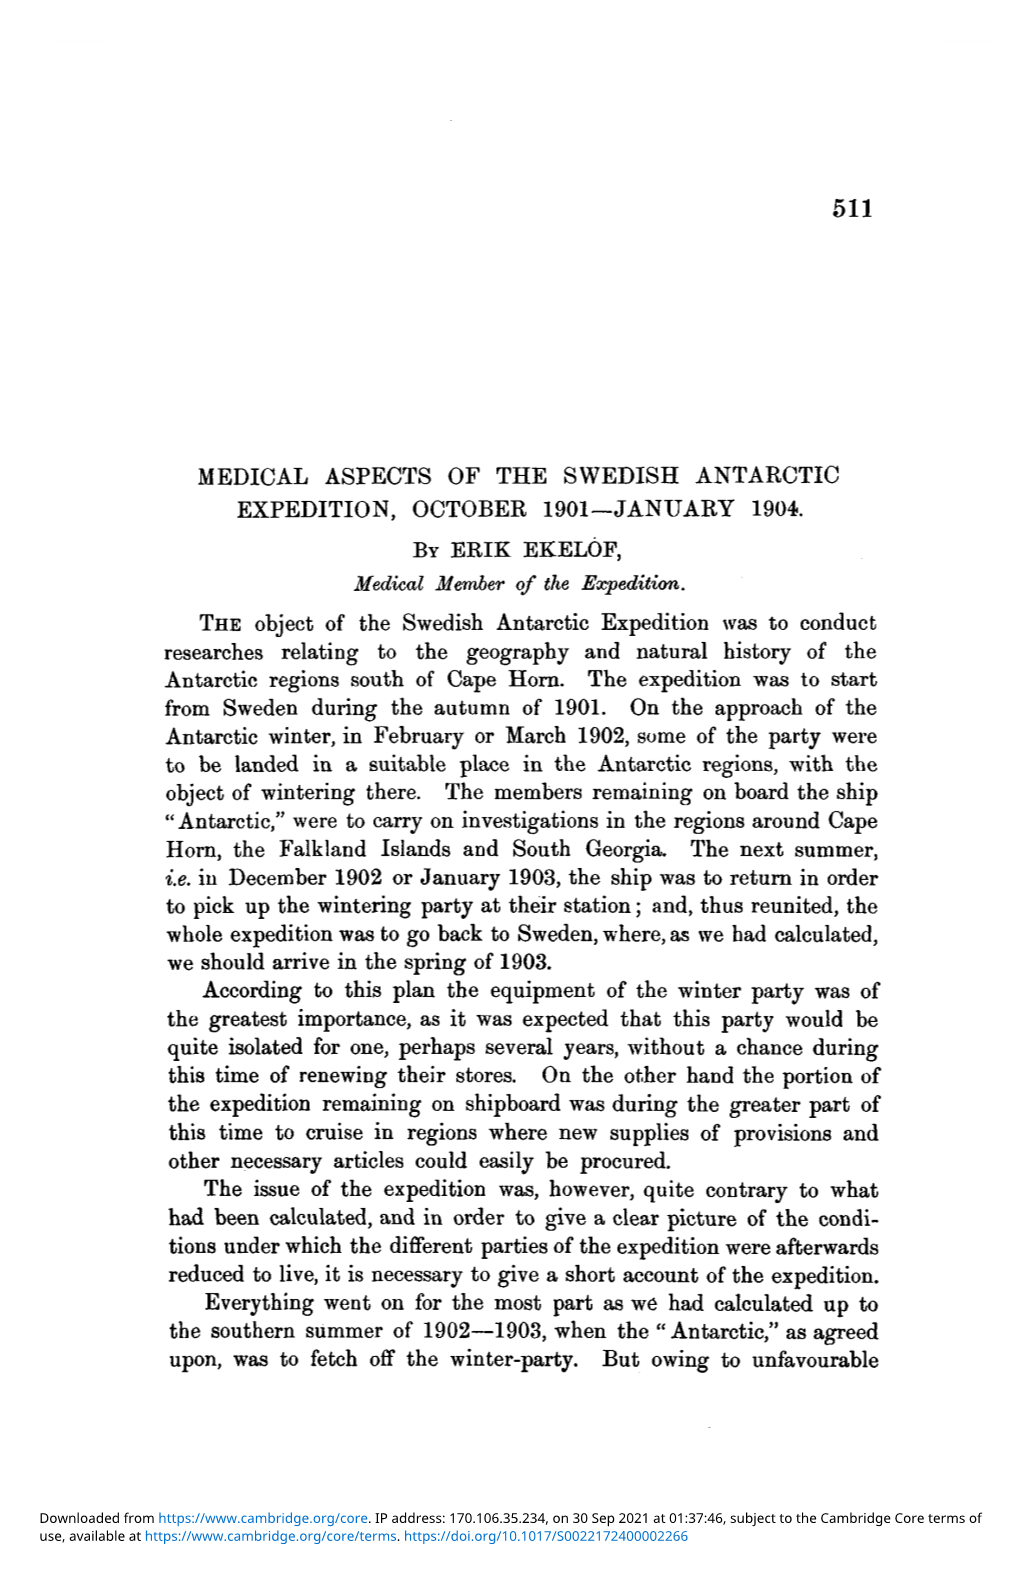 Medical Aspects of the Swedish Antarctic Expedition, October 1901—January 1904